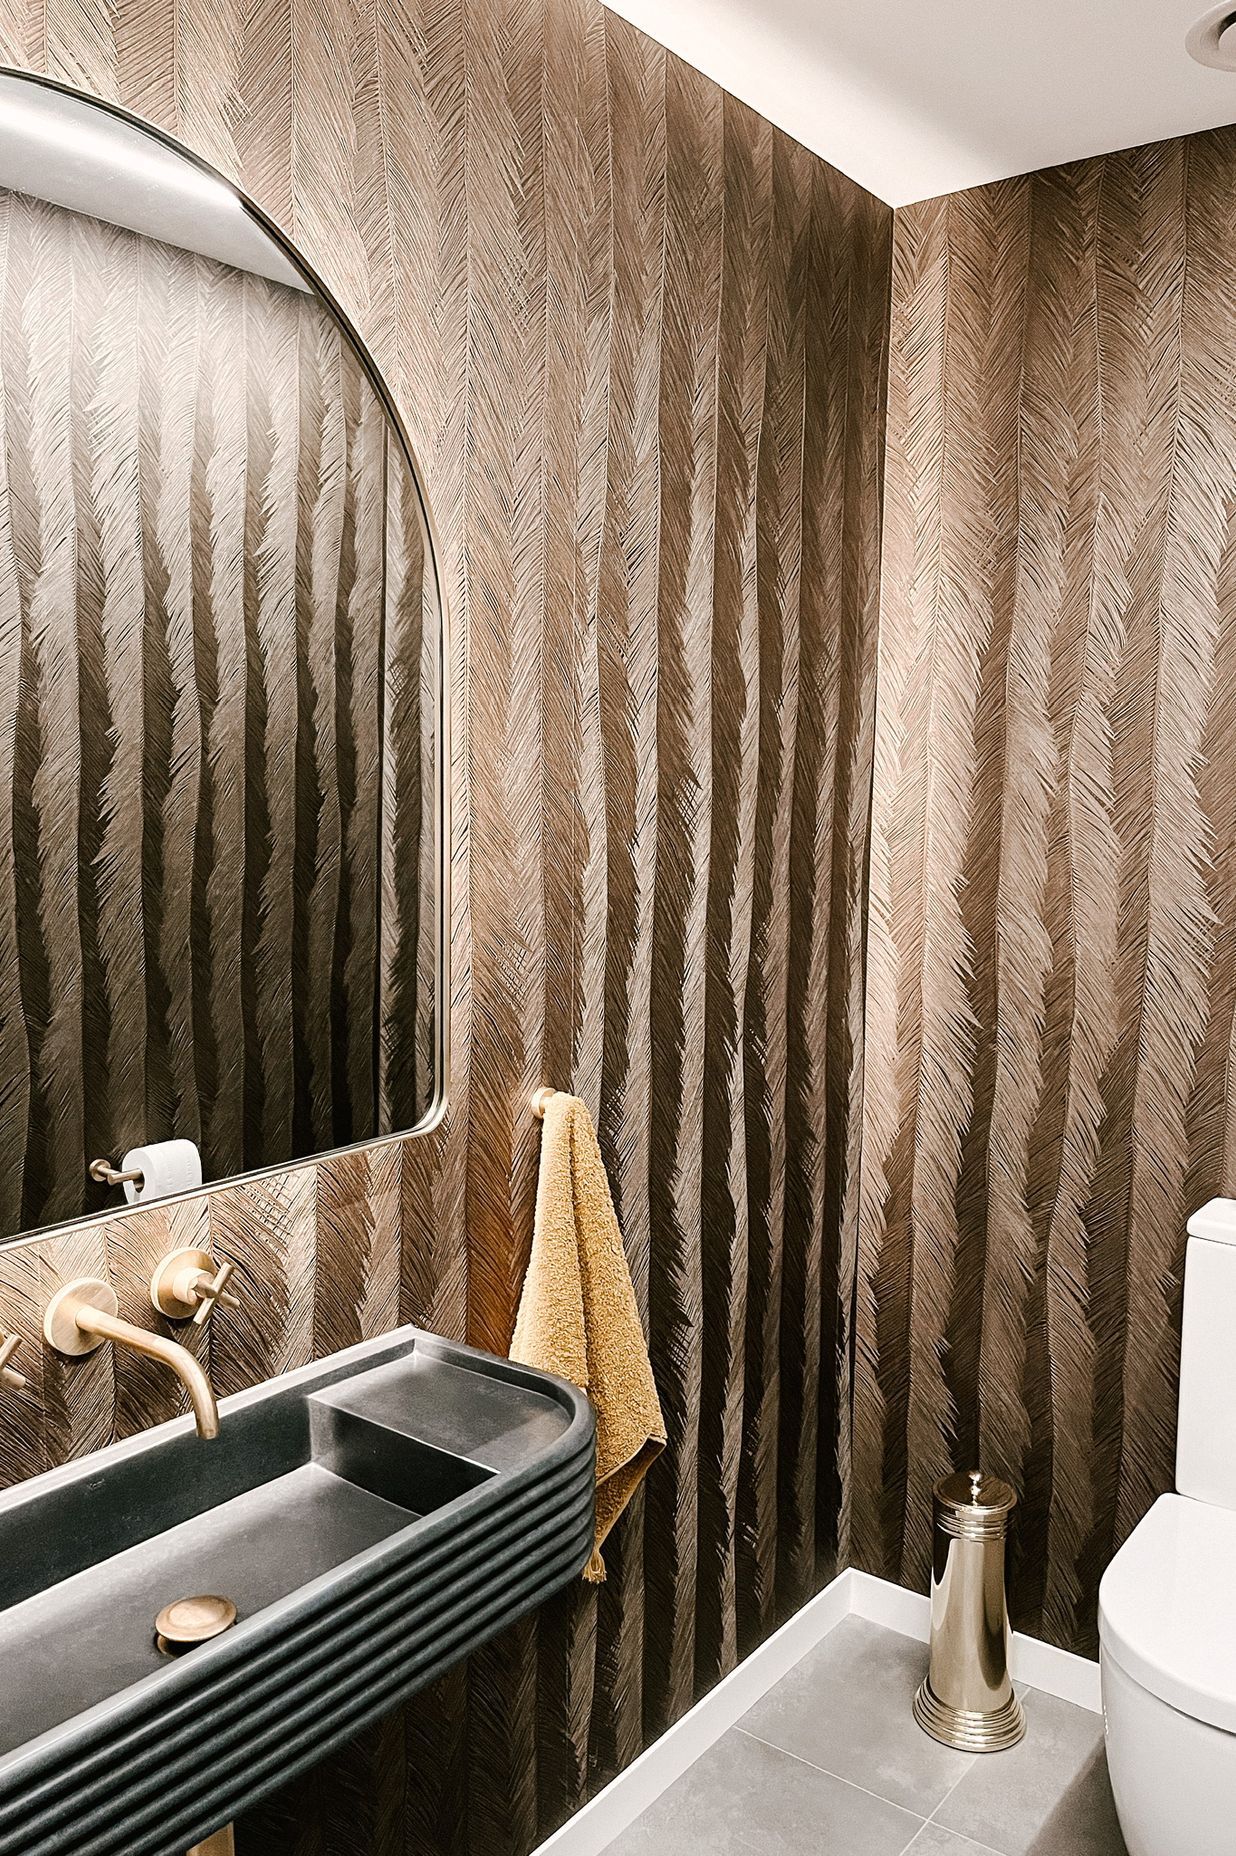 “I feel like it definitely makes a statement but it doesn't feel too overpowering,” says Candice Van Dyk of Mooi Design of this powder room in a Mosgiel house.